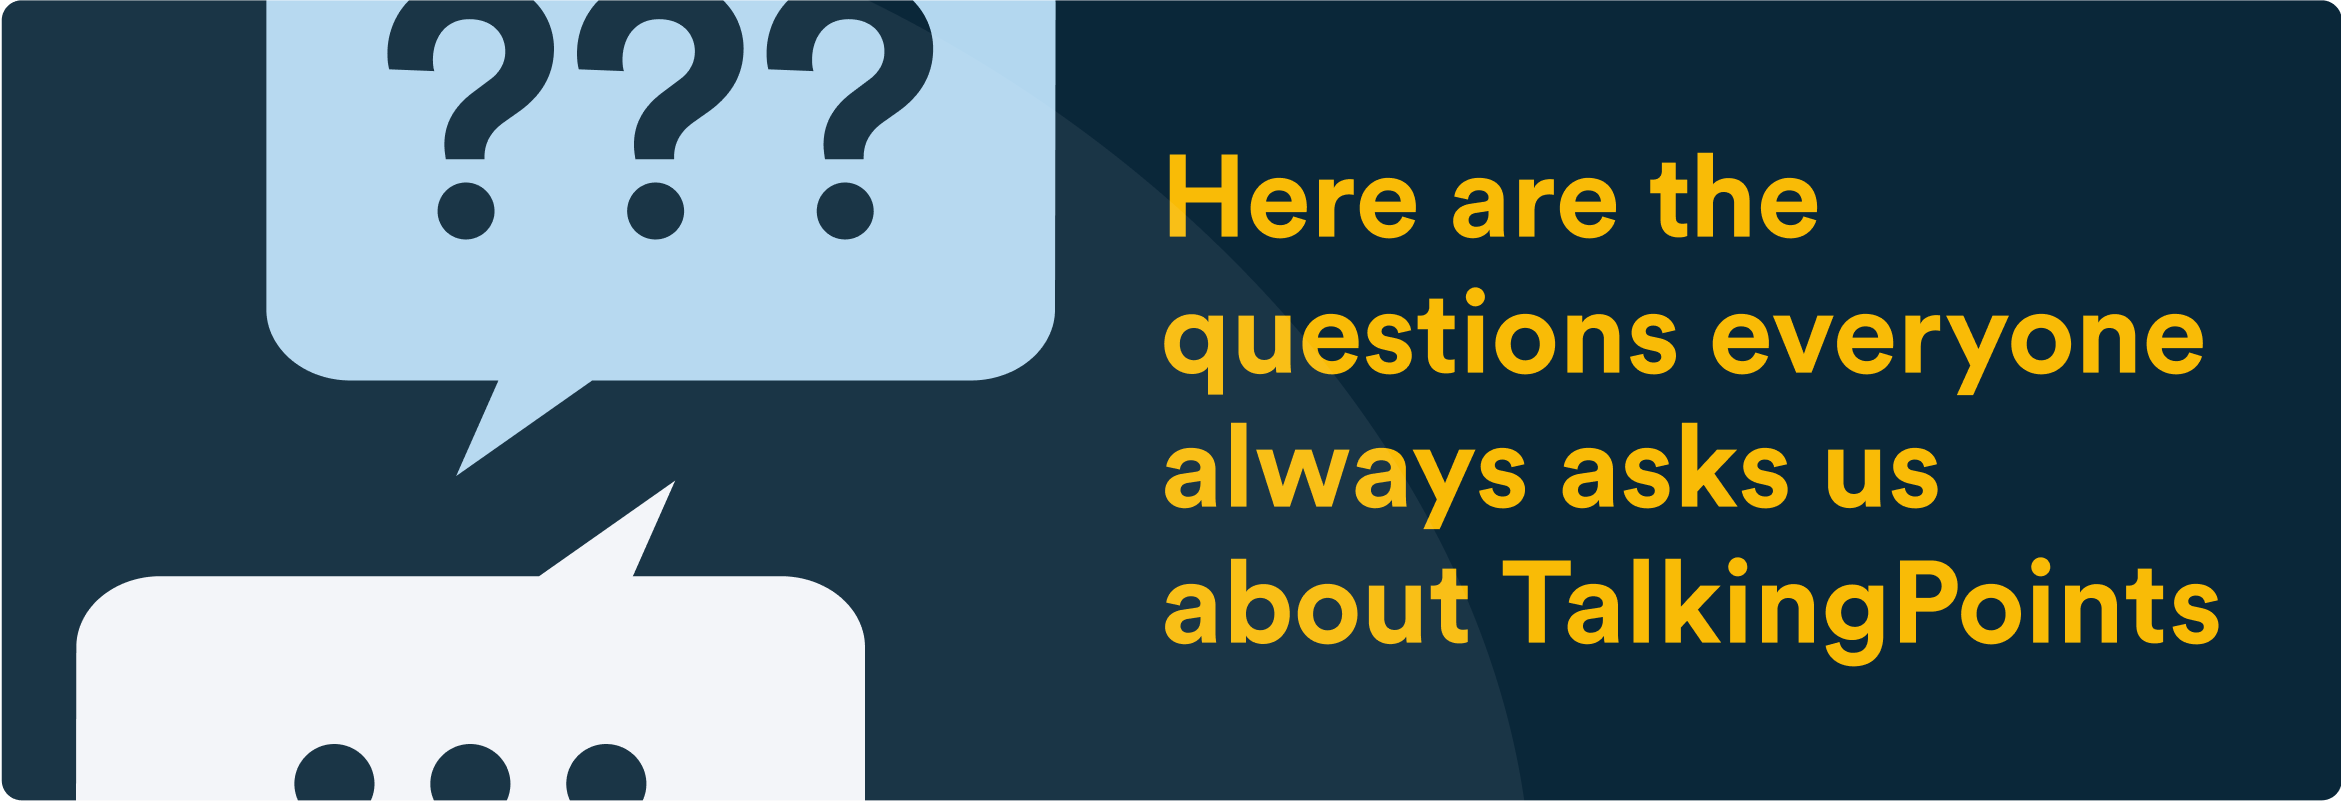 Here are the questions everyone always asks us about TalkingPoints -  TalkingPoints